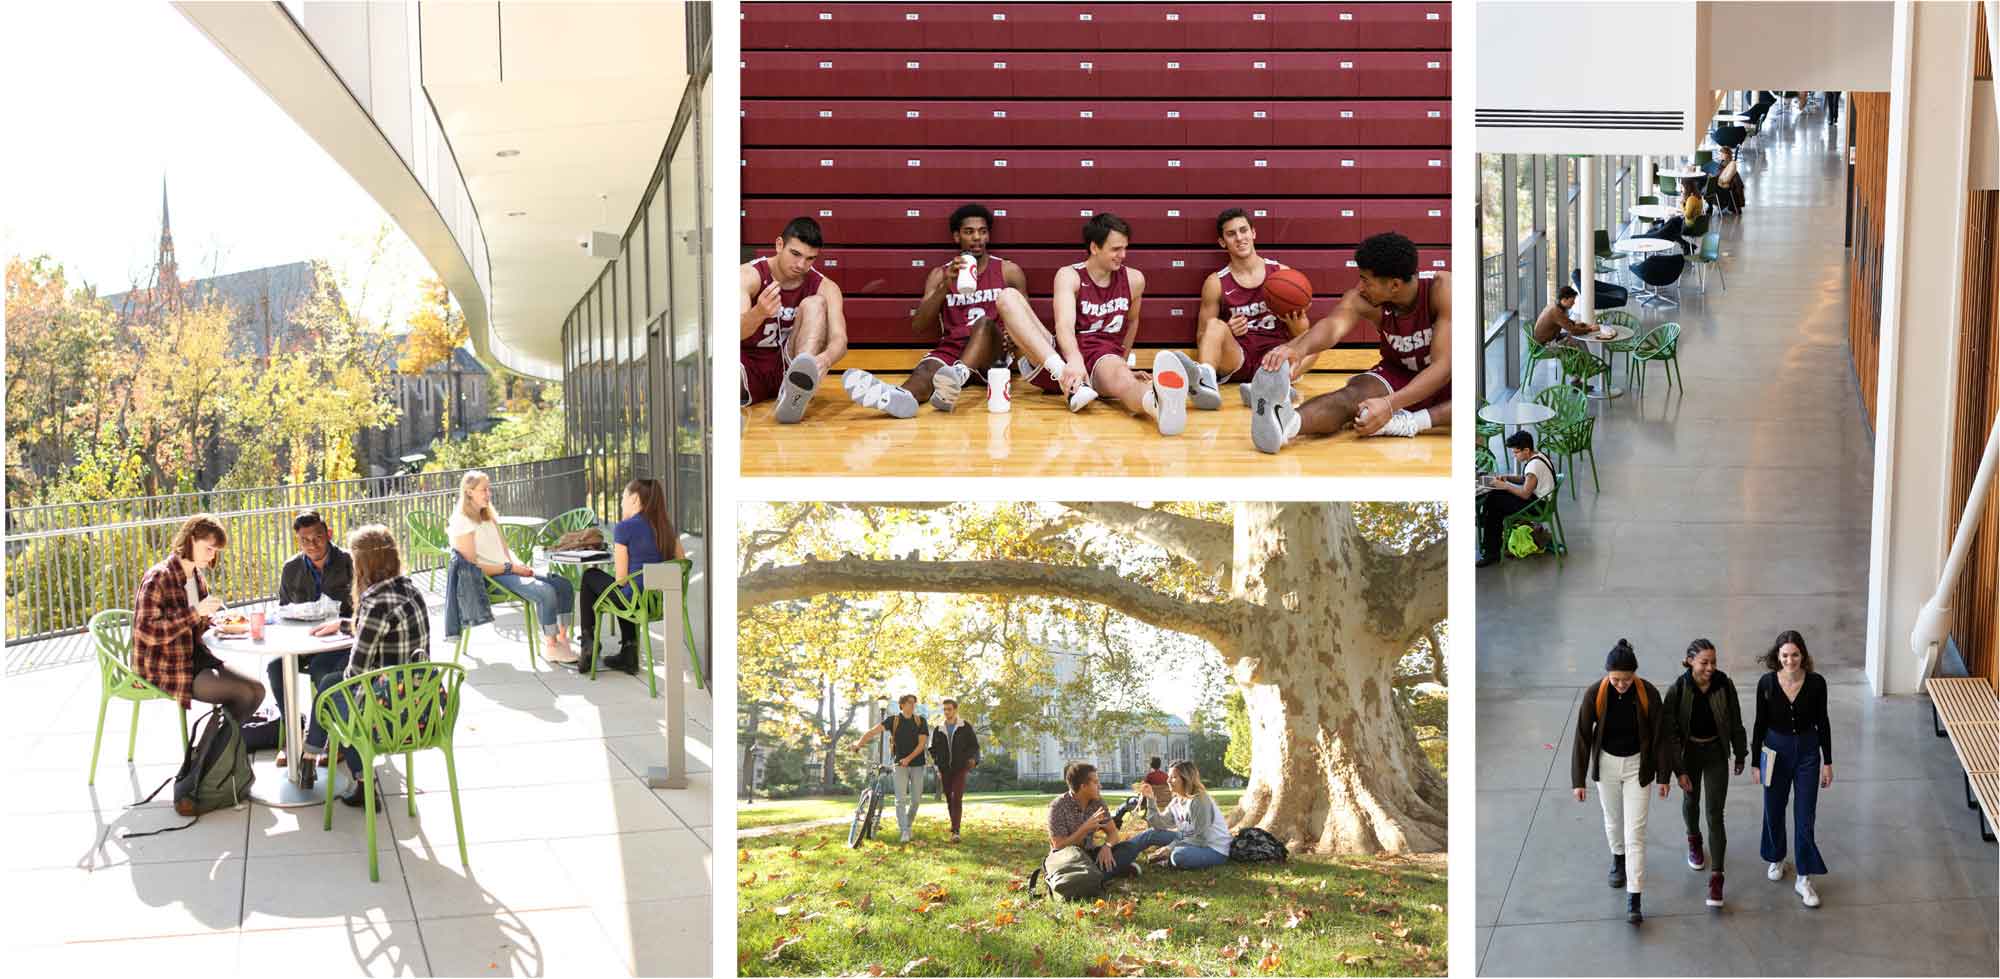 Photo collage of 4 photos showing groups of people on Vassar campus either seated indoors or walking outside